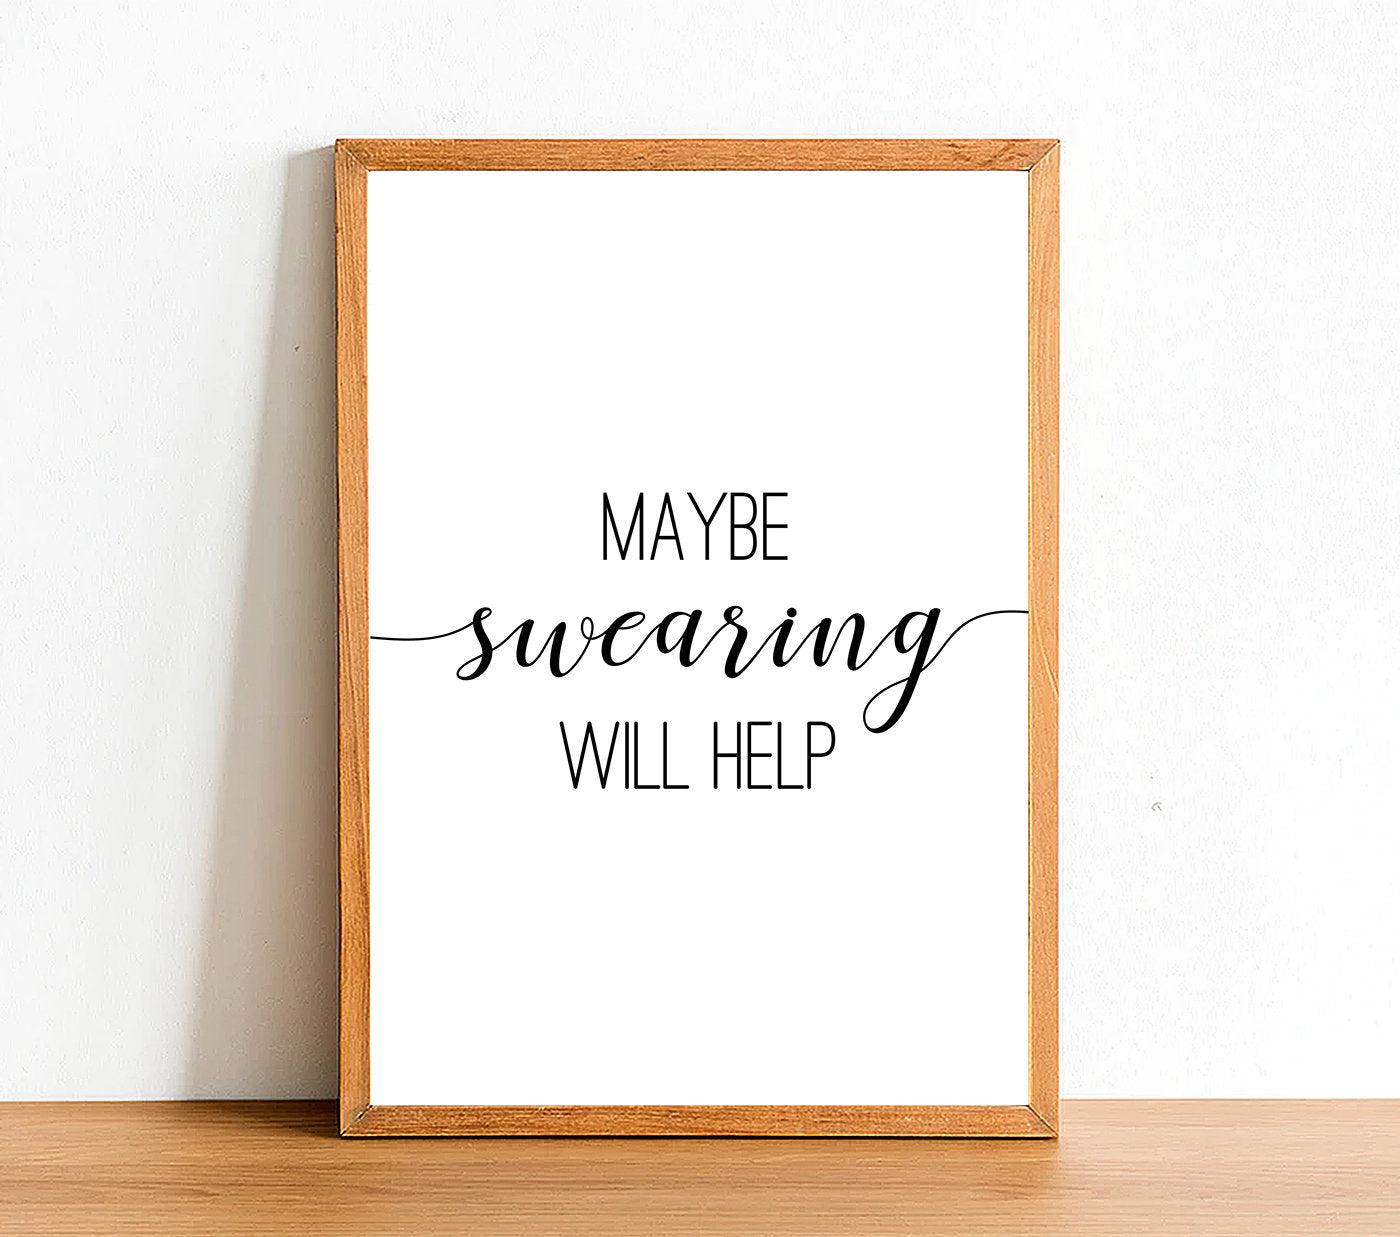 Maybe Swearing Will Help - Inspirational Print - Classic Posters